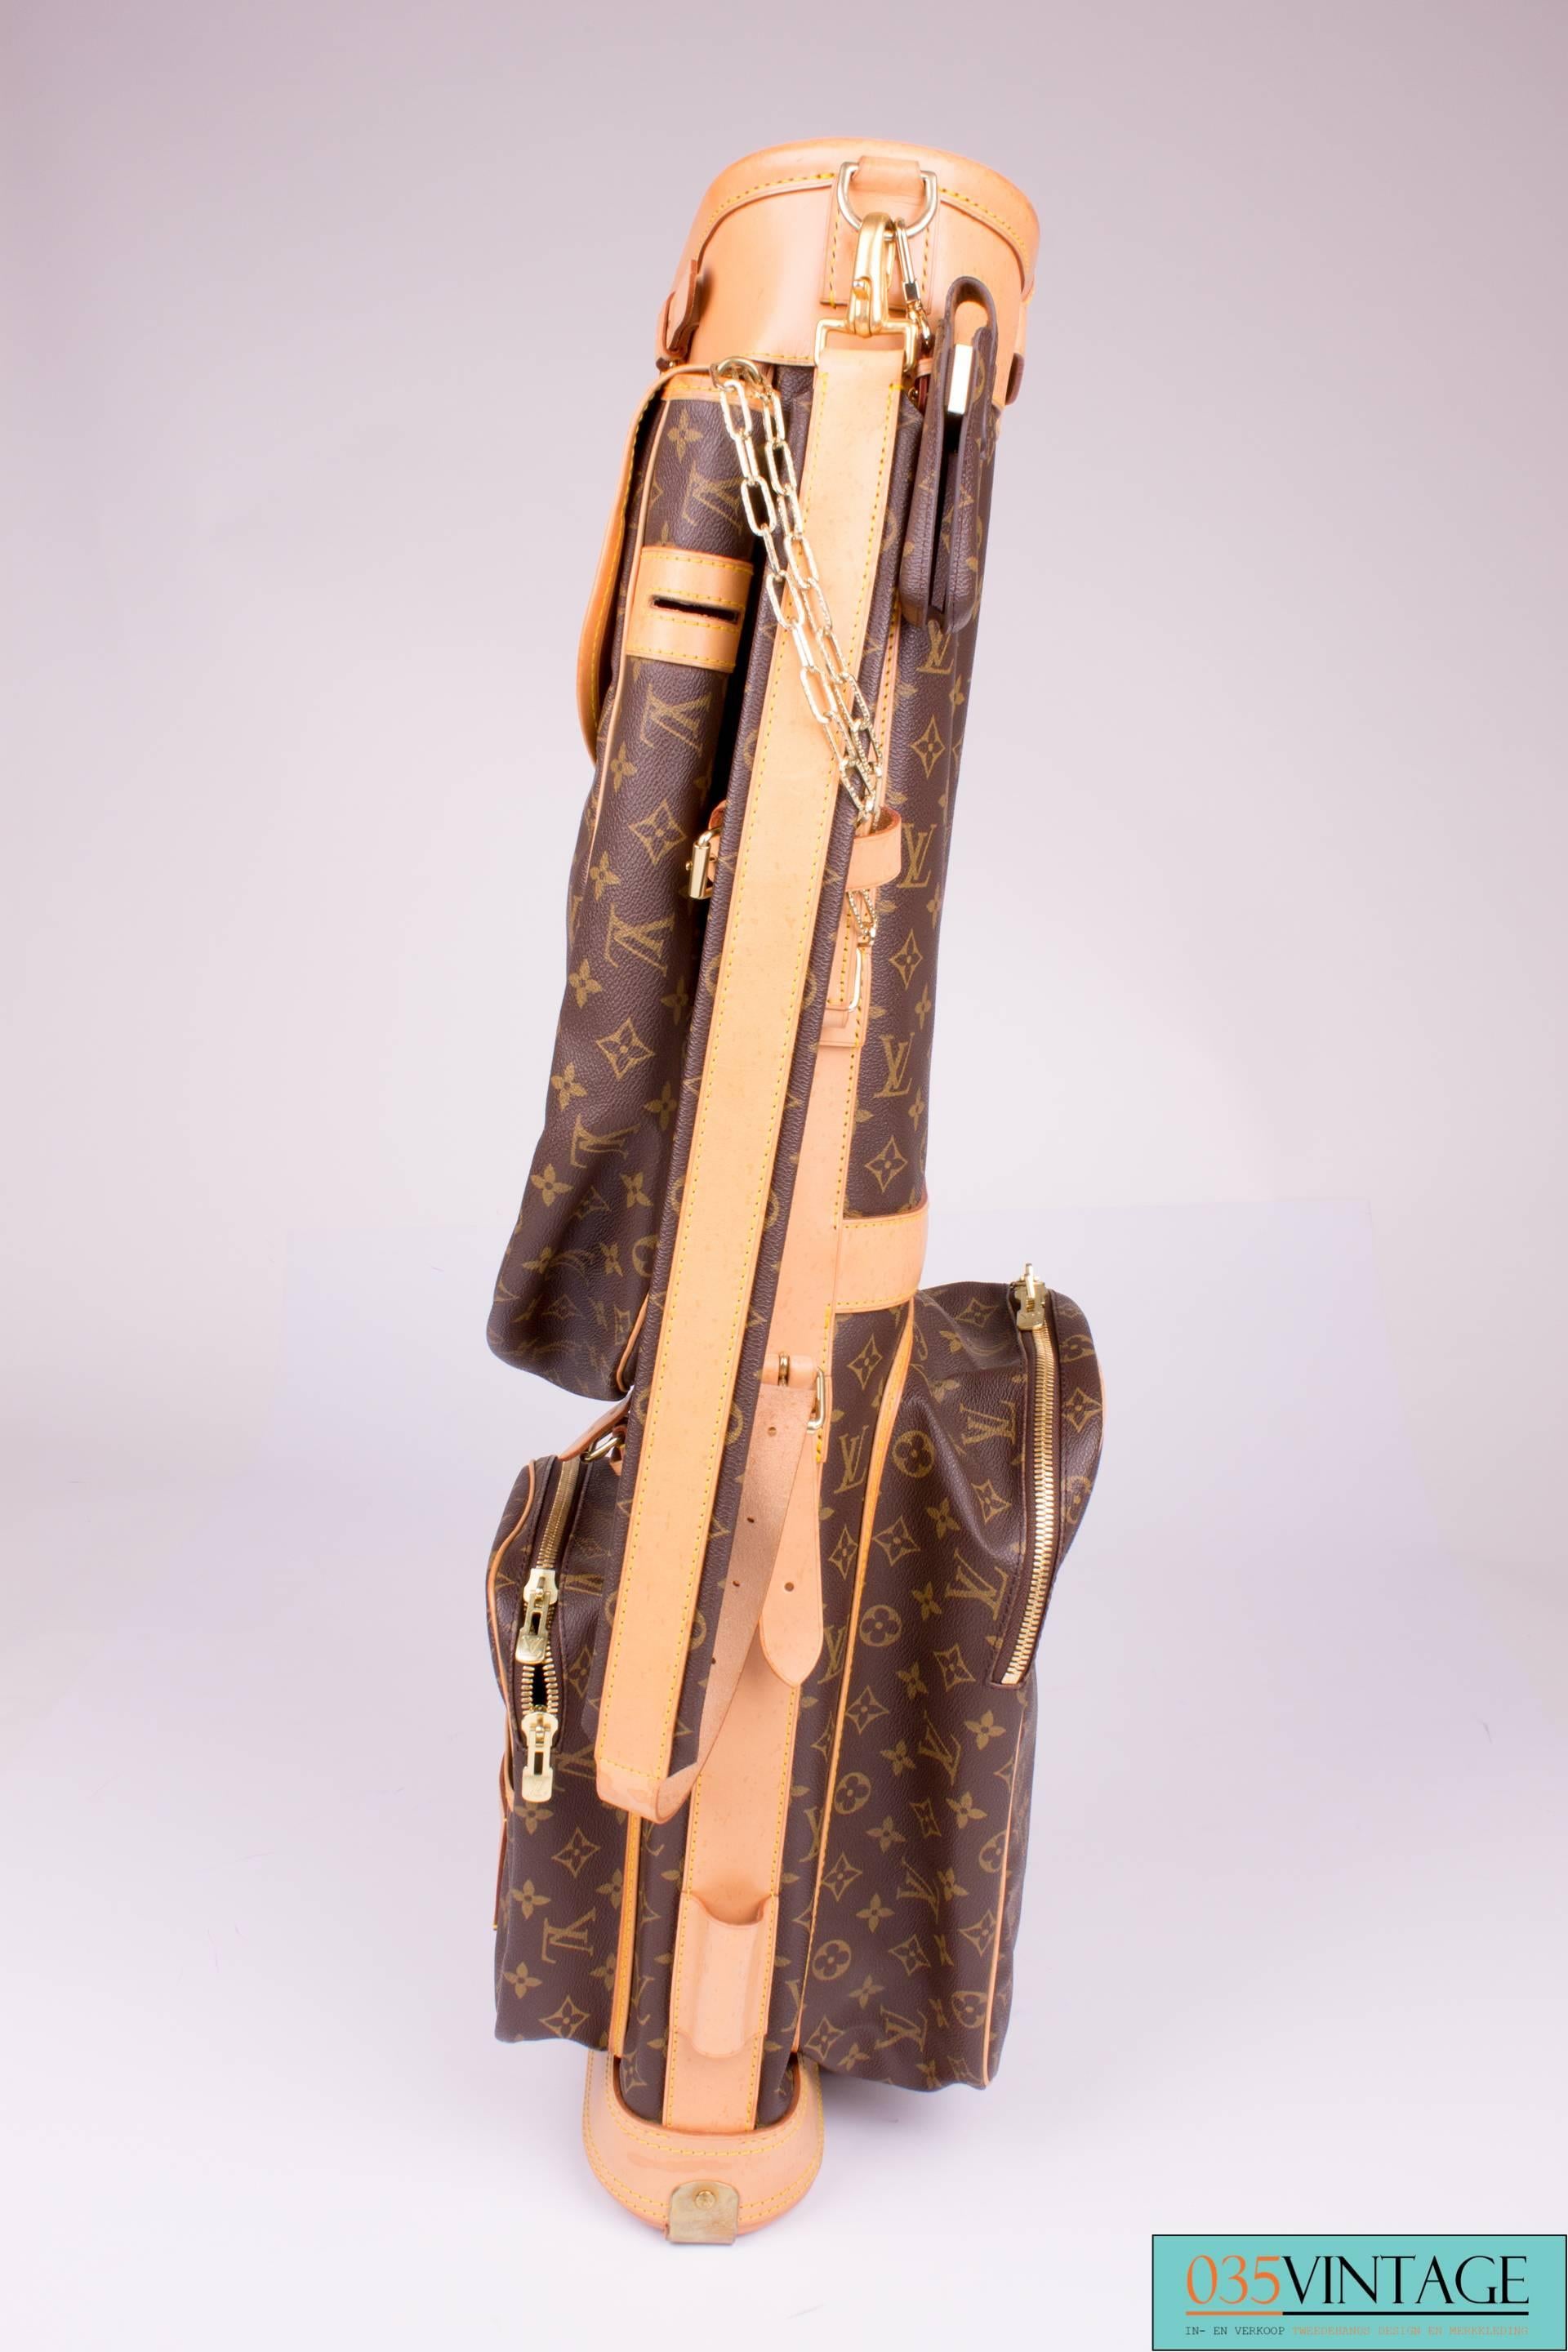 Stylish to the golf course with this Louis Vuitton Golf Bag in dark brown monogram canvas. How cool is that?!

This bag is fully made of dark brown monogram canvas, of course with trimming in natural colored leather and goldtone brass hardware. Lots